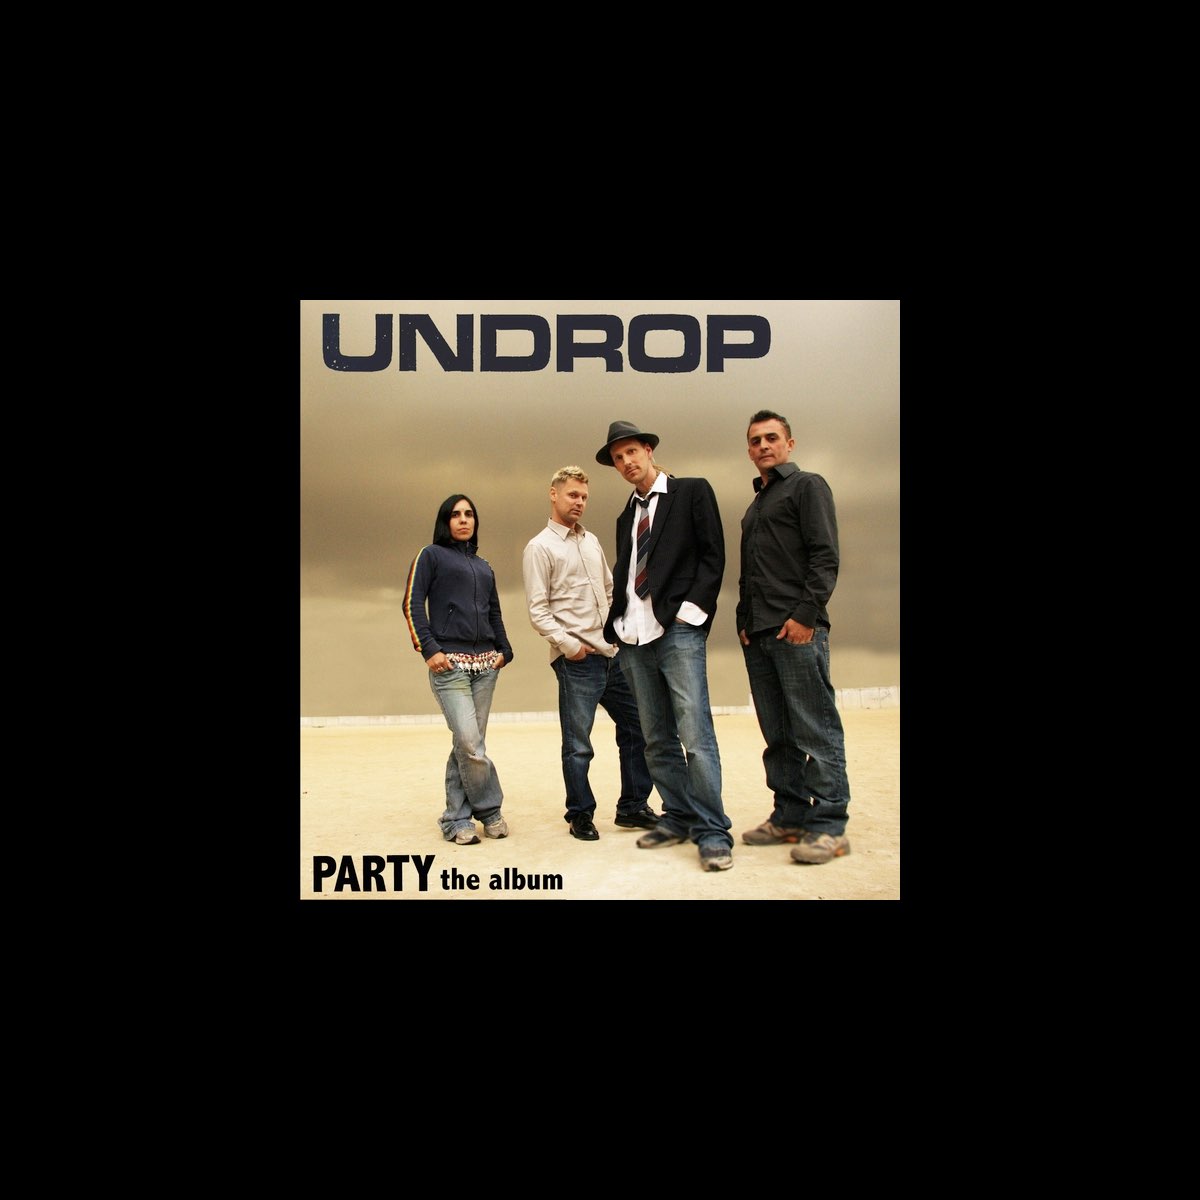 Party (The Album) by Undrop on Apple Music